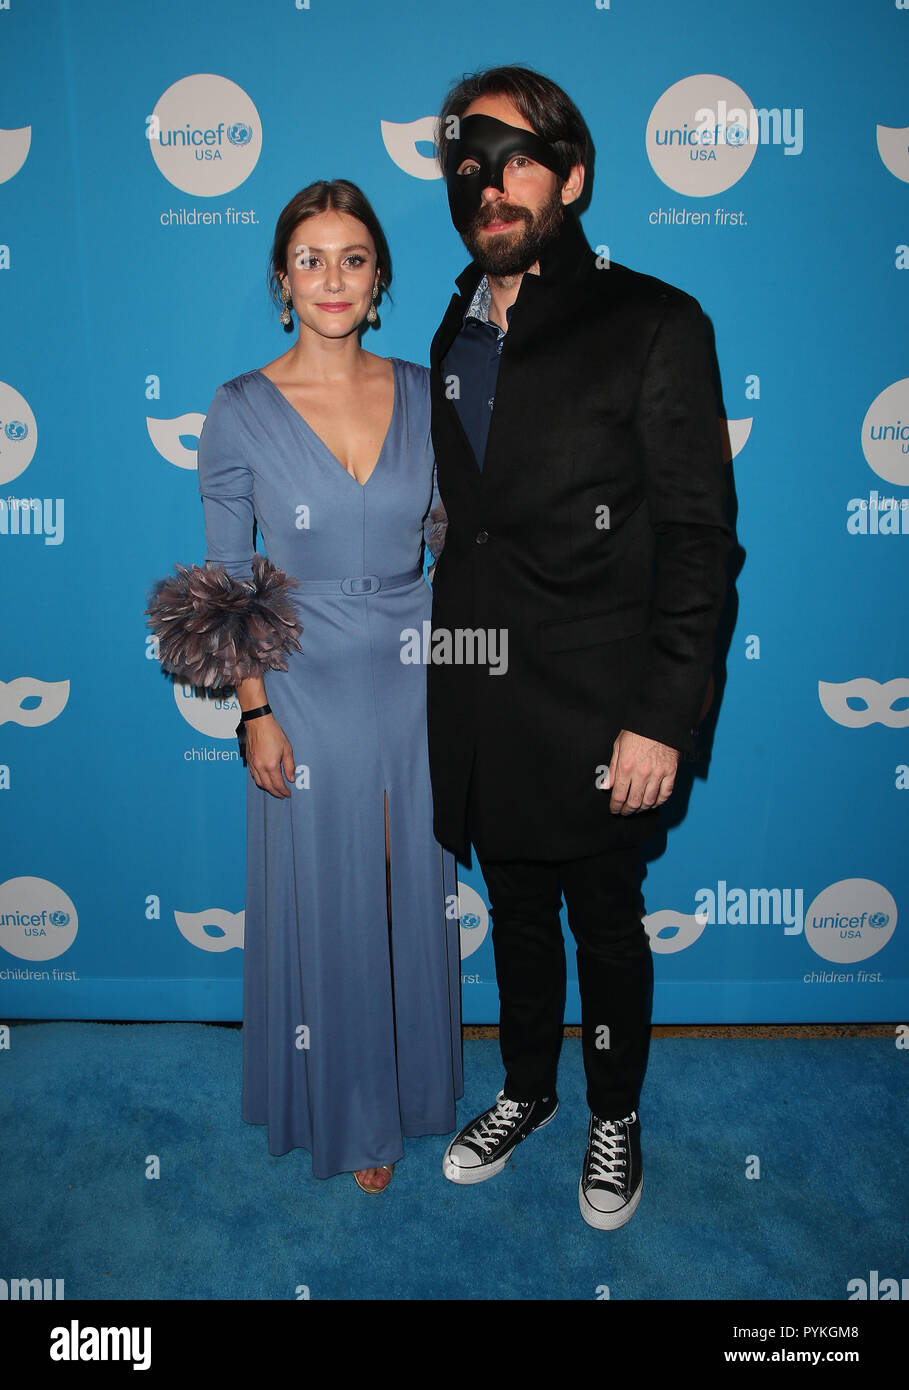 Los Angeles, California, USA. 25th Oct, 2018. Julianna Guill, Martin Starr during arrivals for the 6th Annual UNICEF Masquerade Ball. Credit: Faye Sadou/AdMedia/ZUMA Wire/Alamy Live News Stock Photo